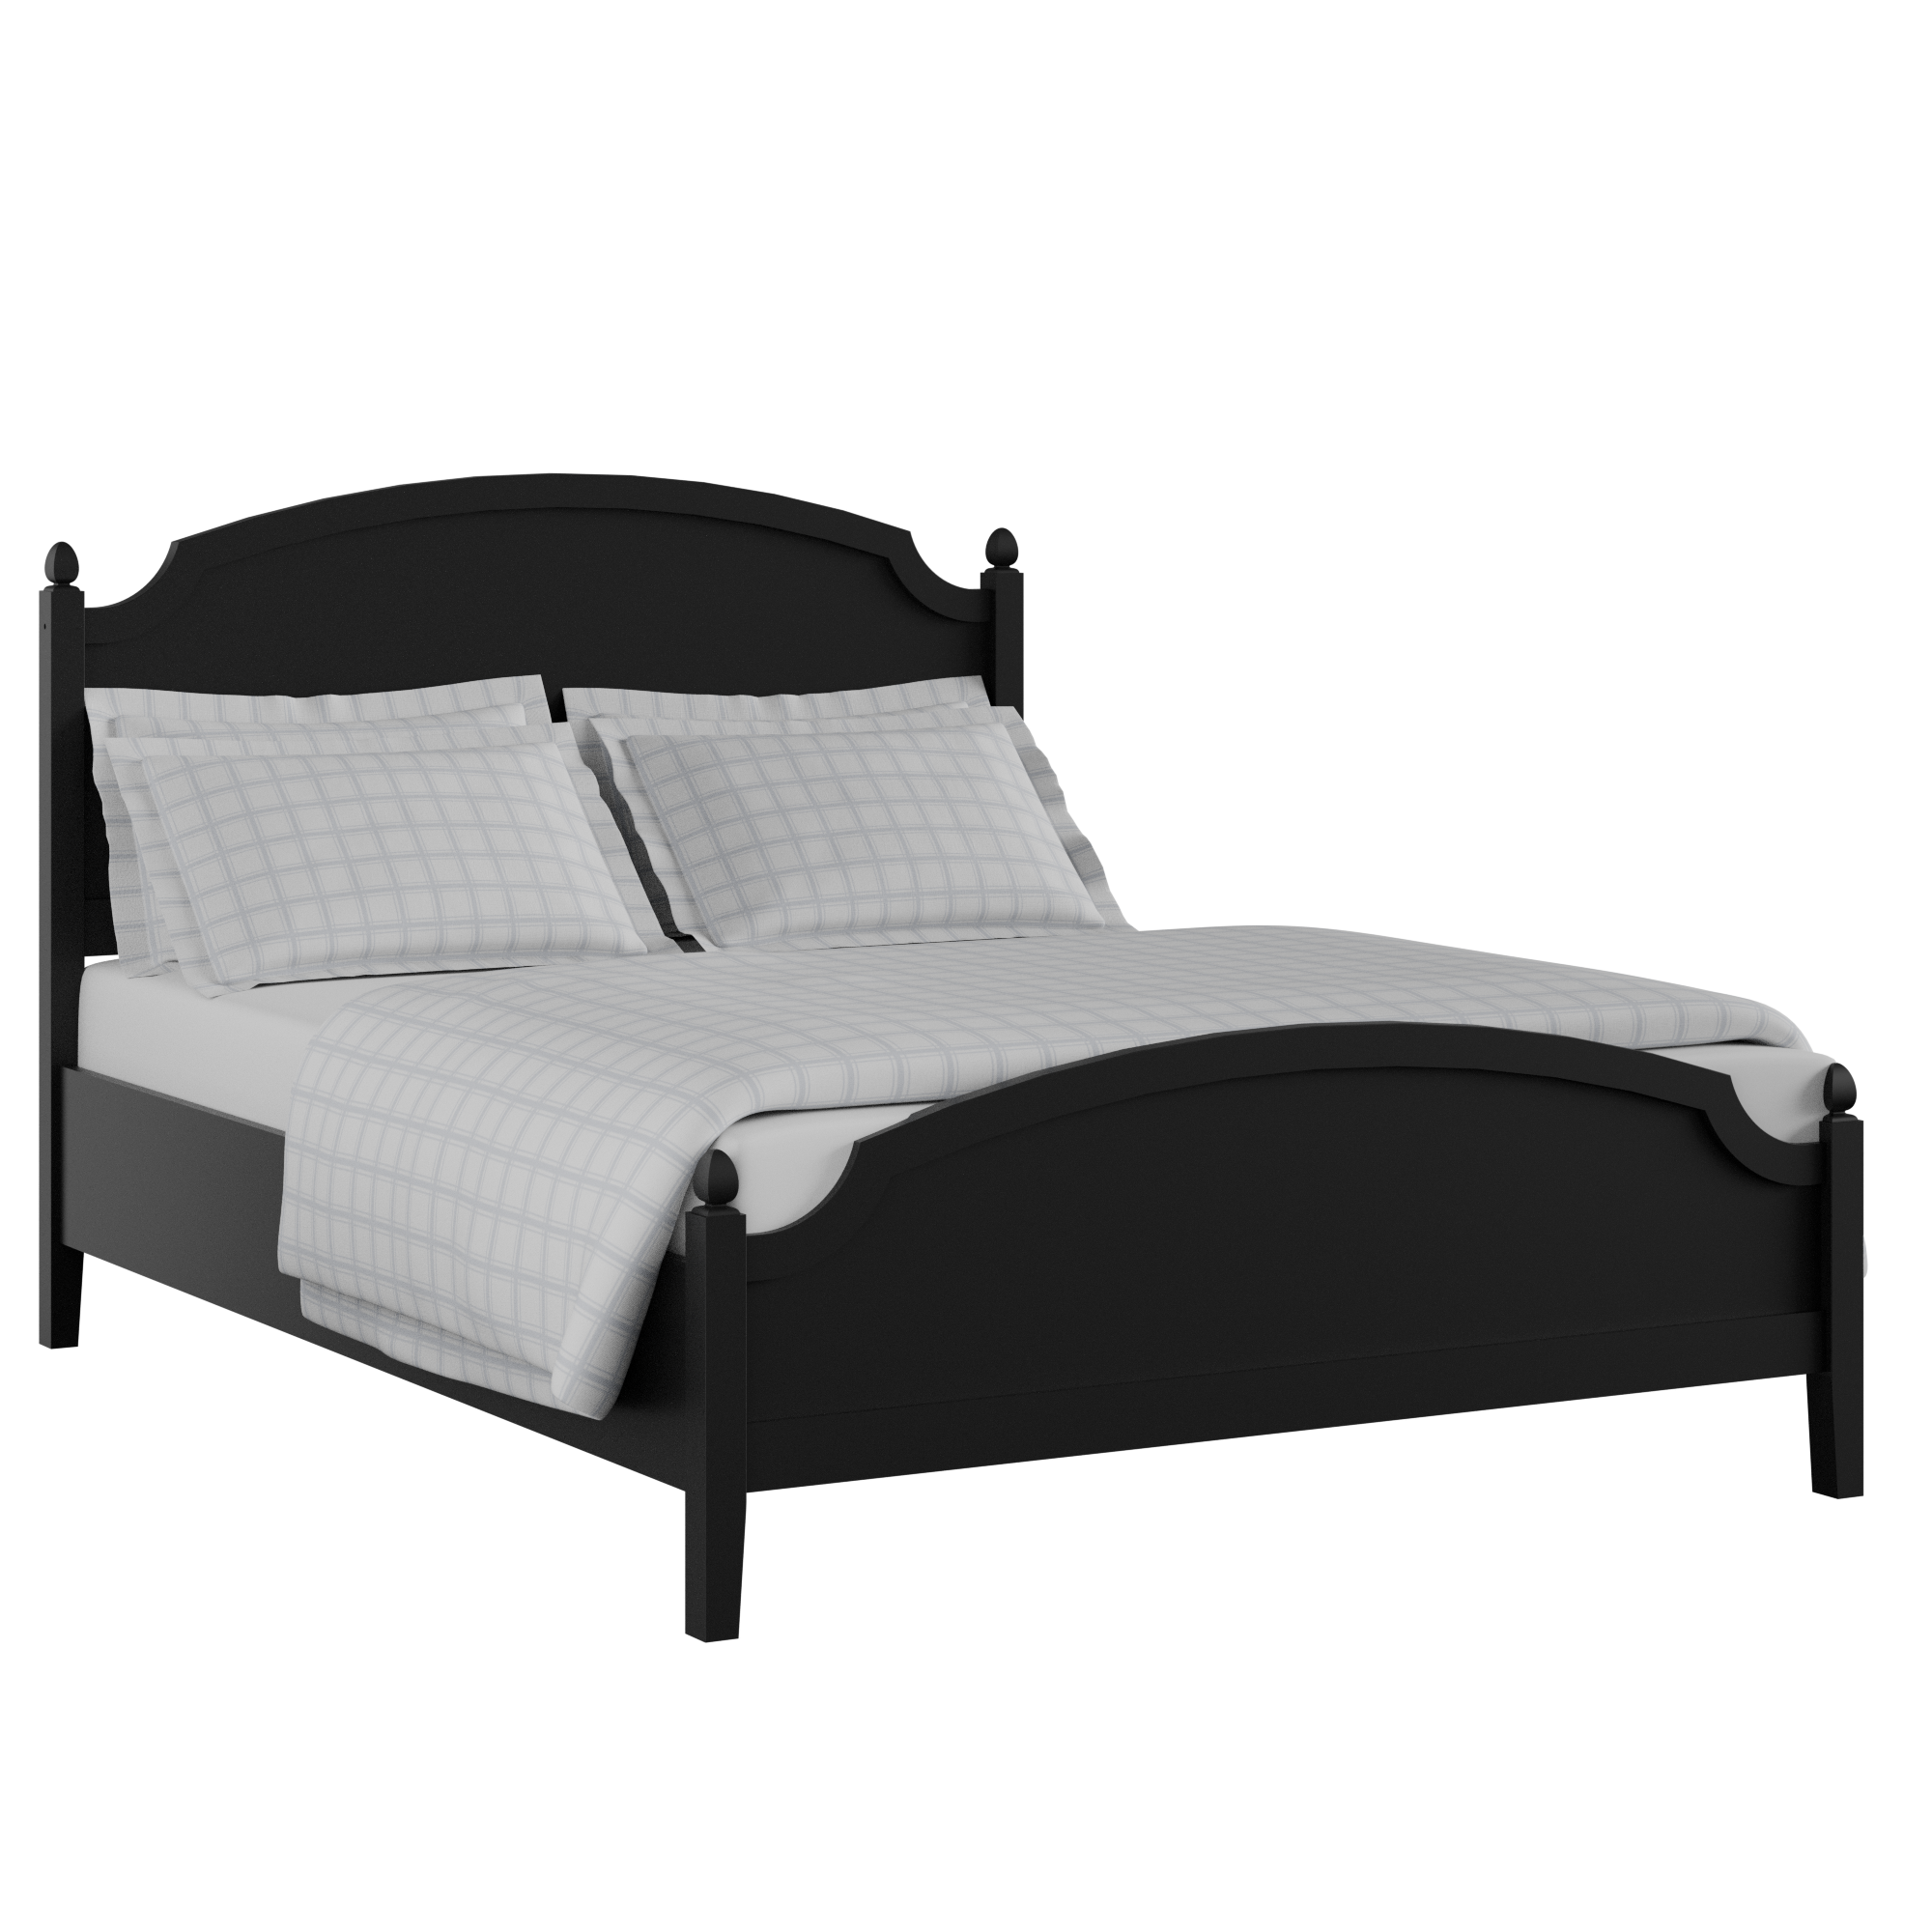 Kipling Low Footend Painted painted wood bed in black with Juno mattress